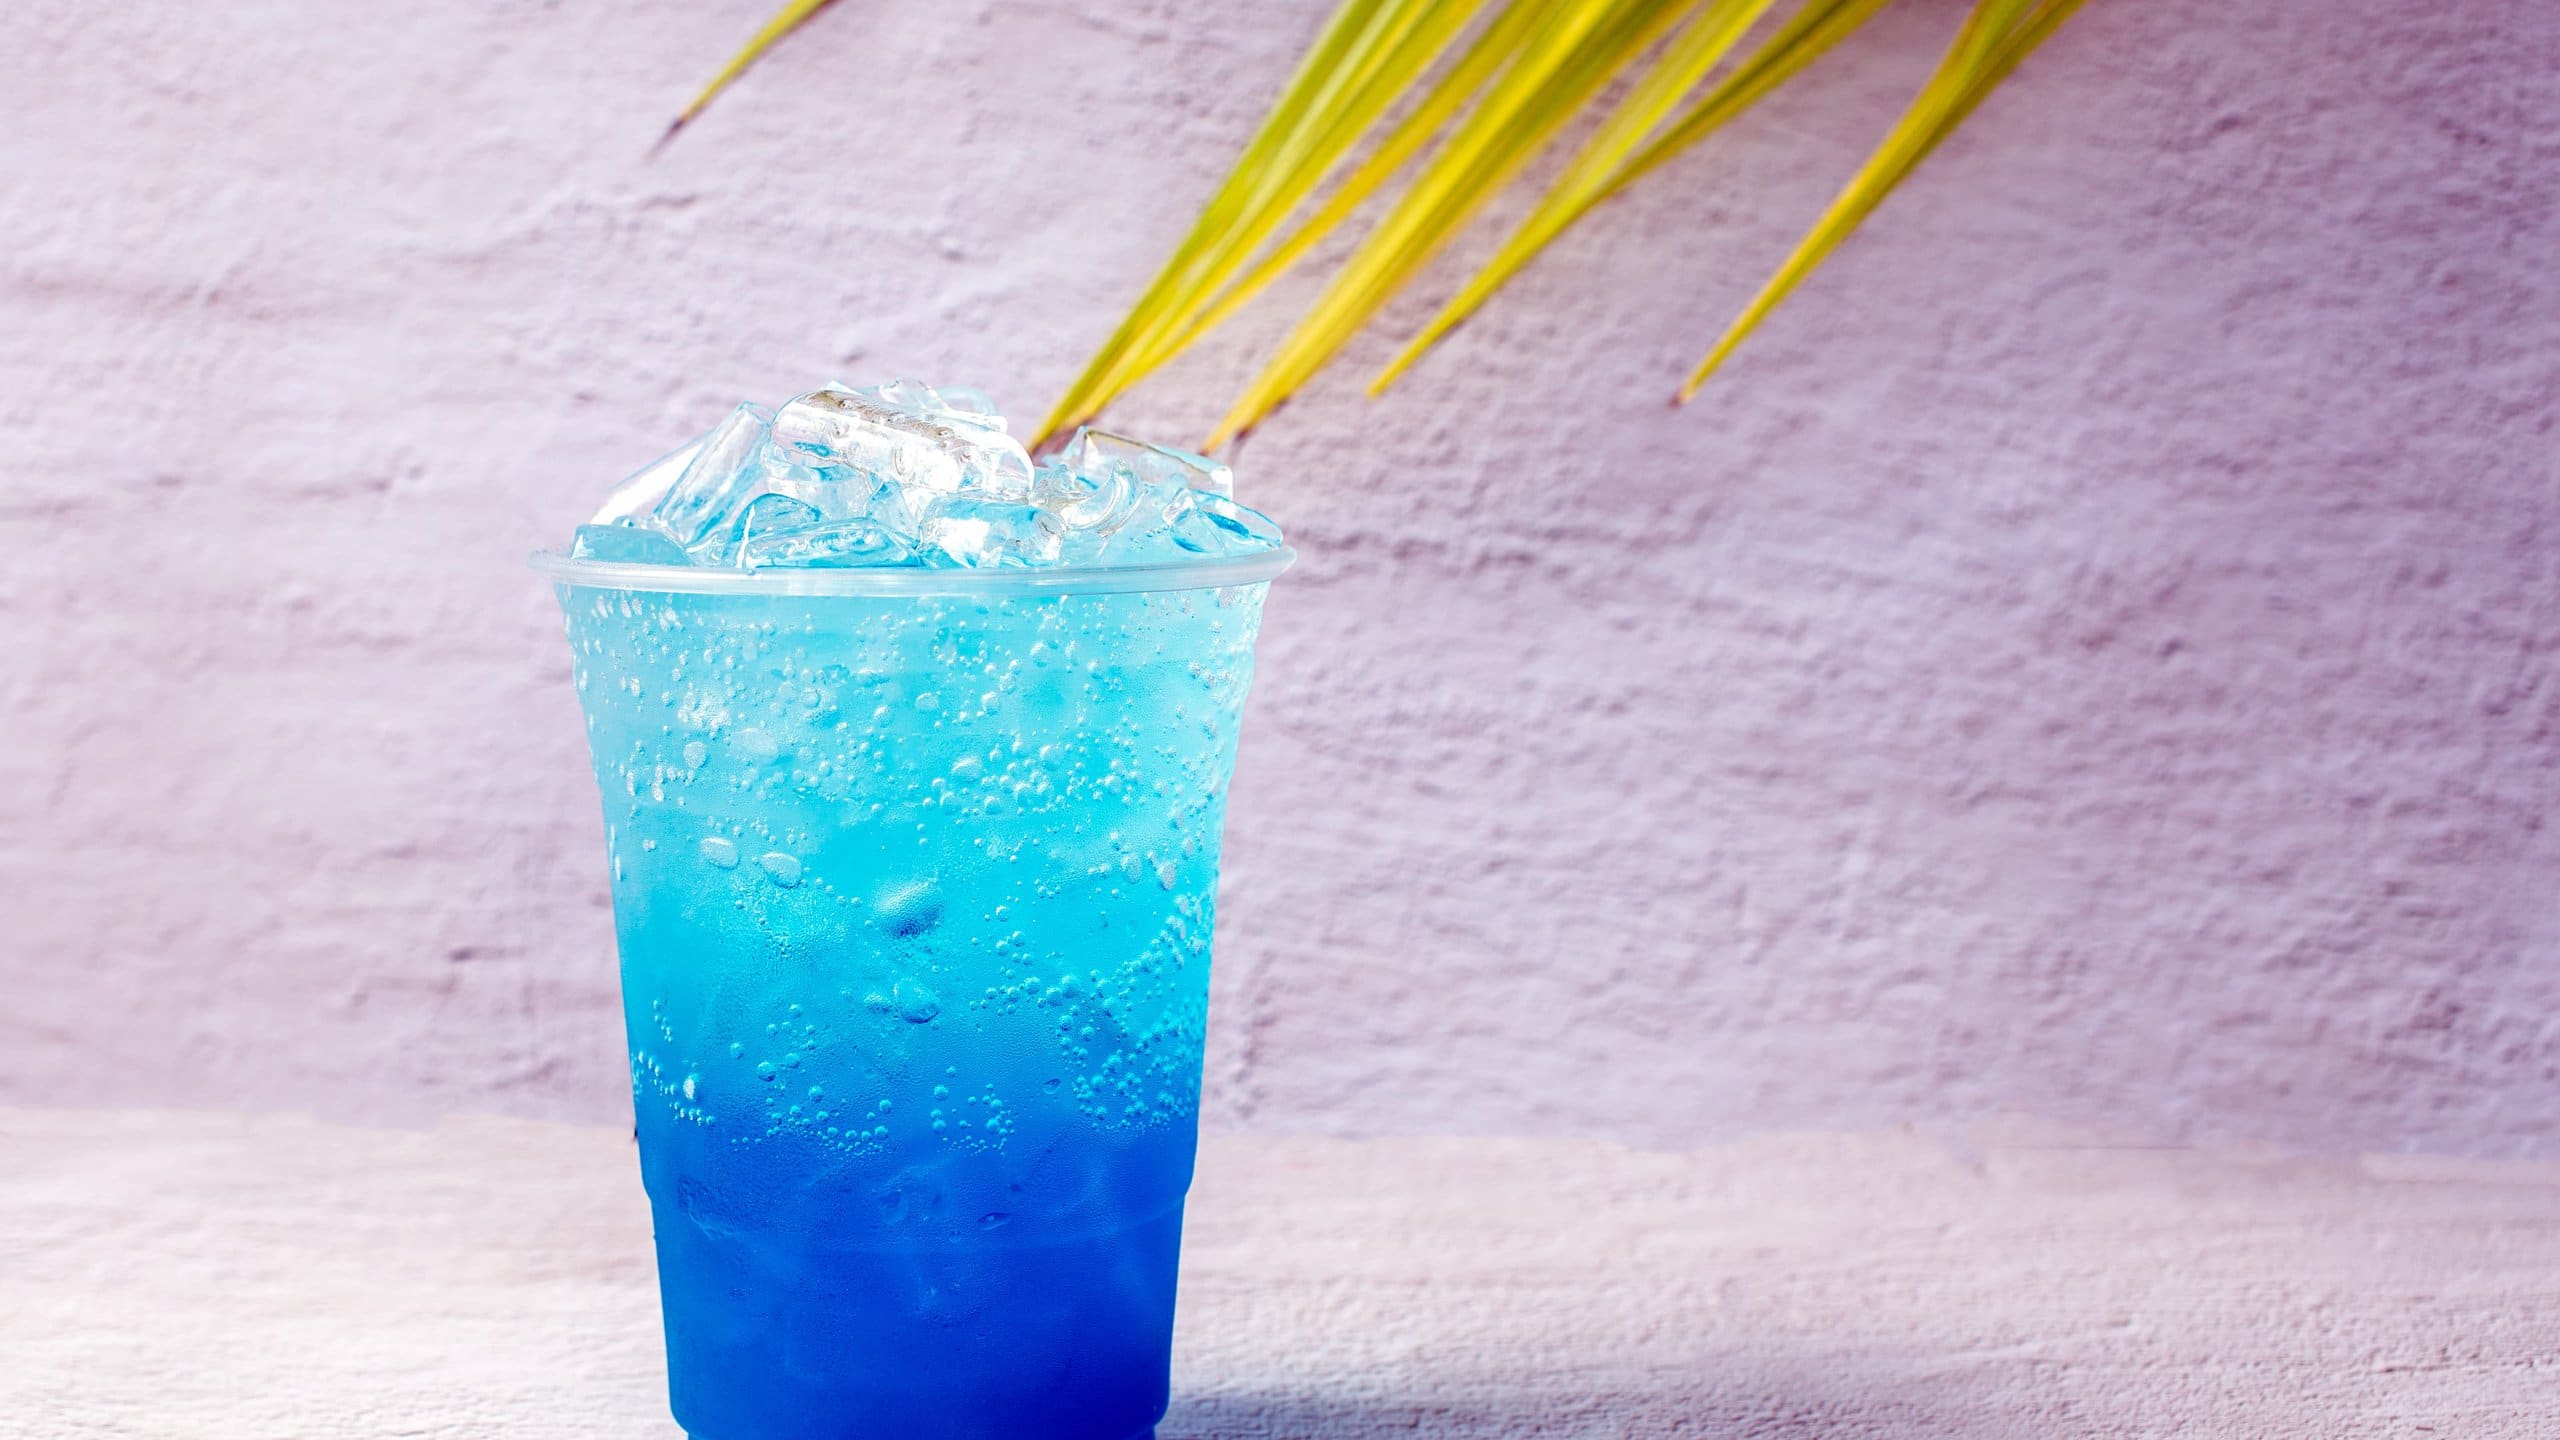 Blue Nuka Cola recipe drink with ice